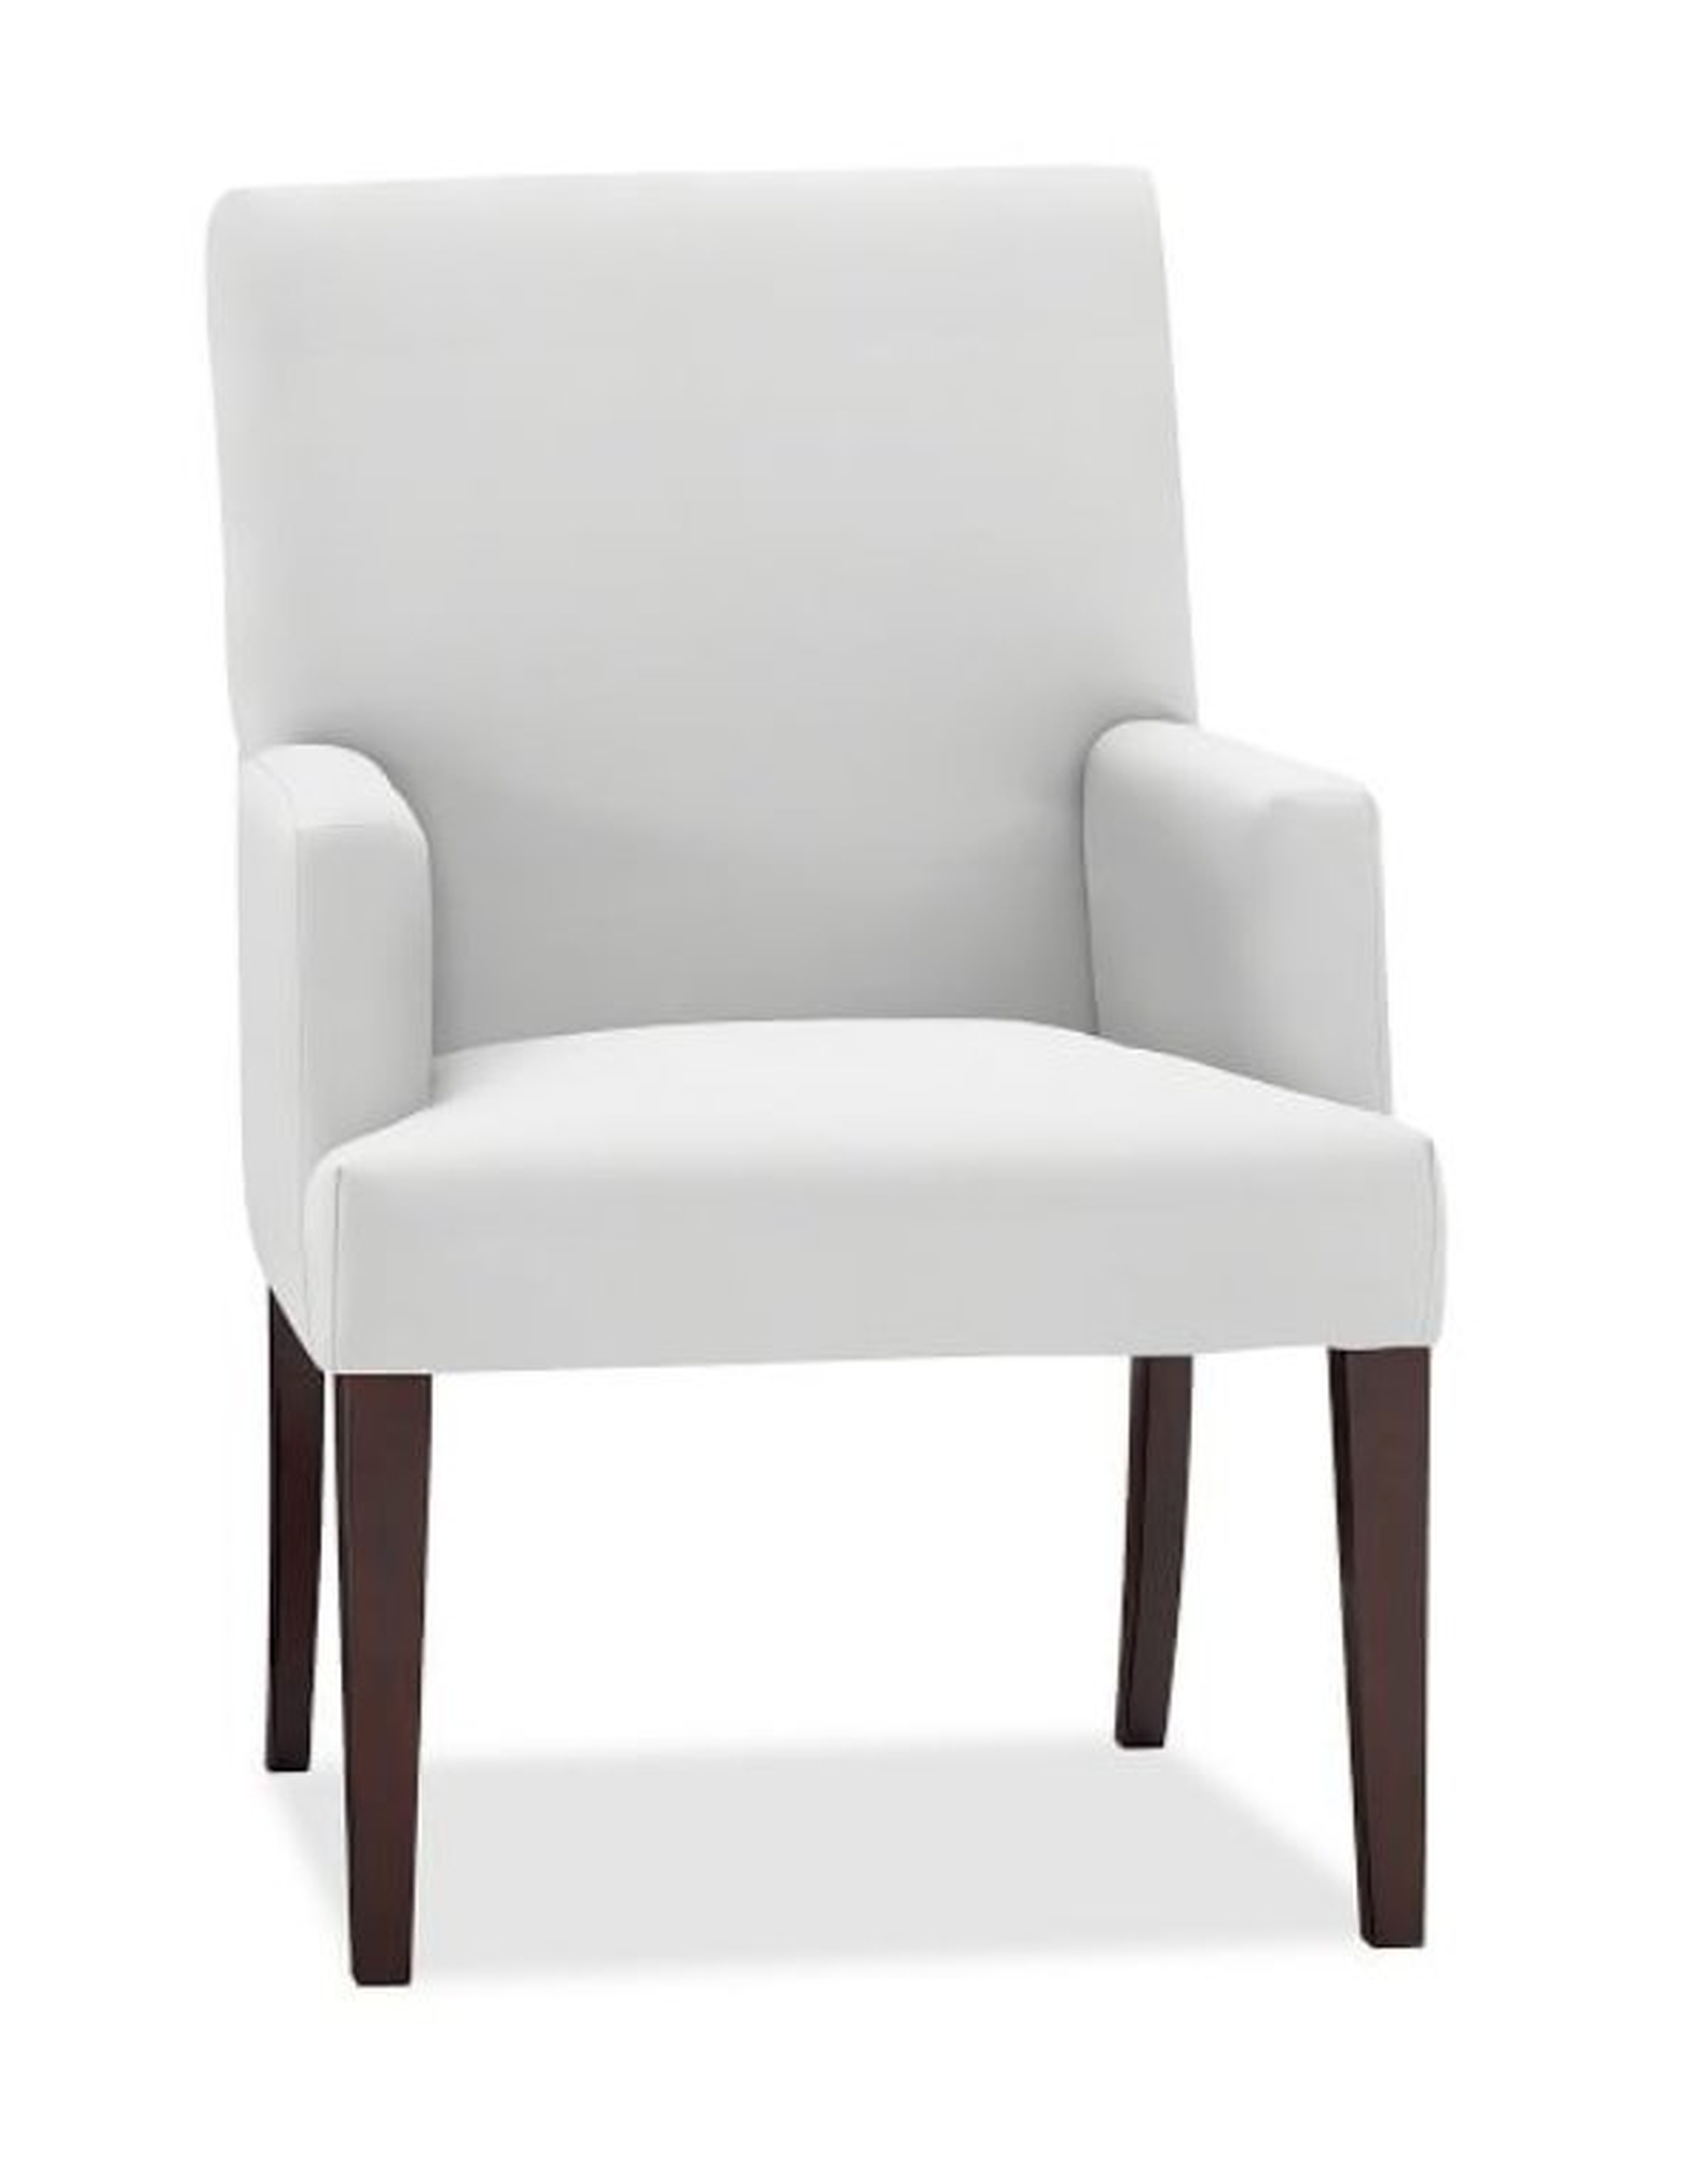 Comfort Square Upholstered Dining Armchair - Pottery Barn